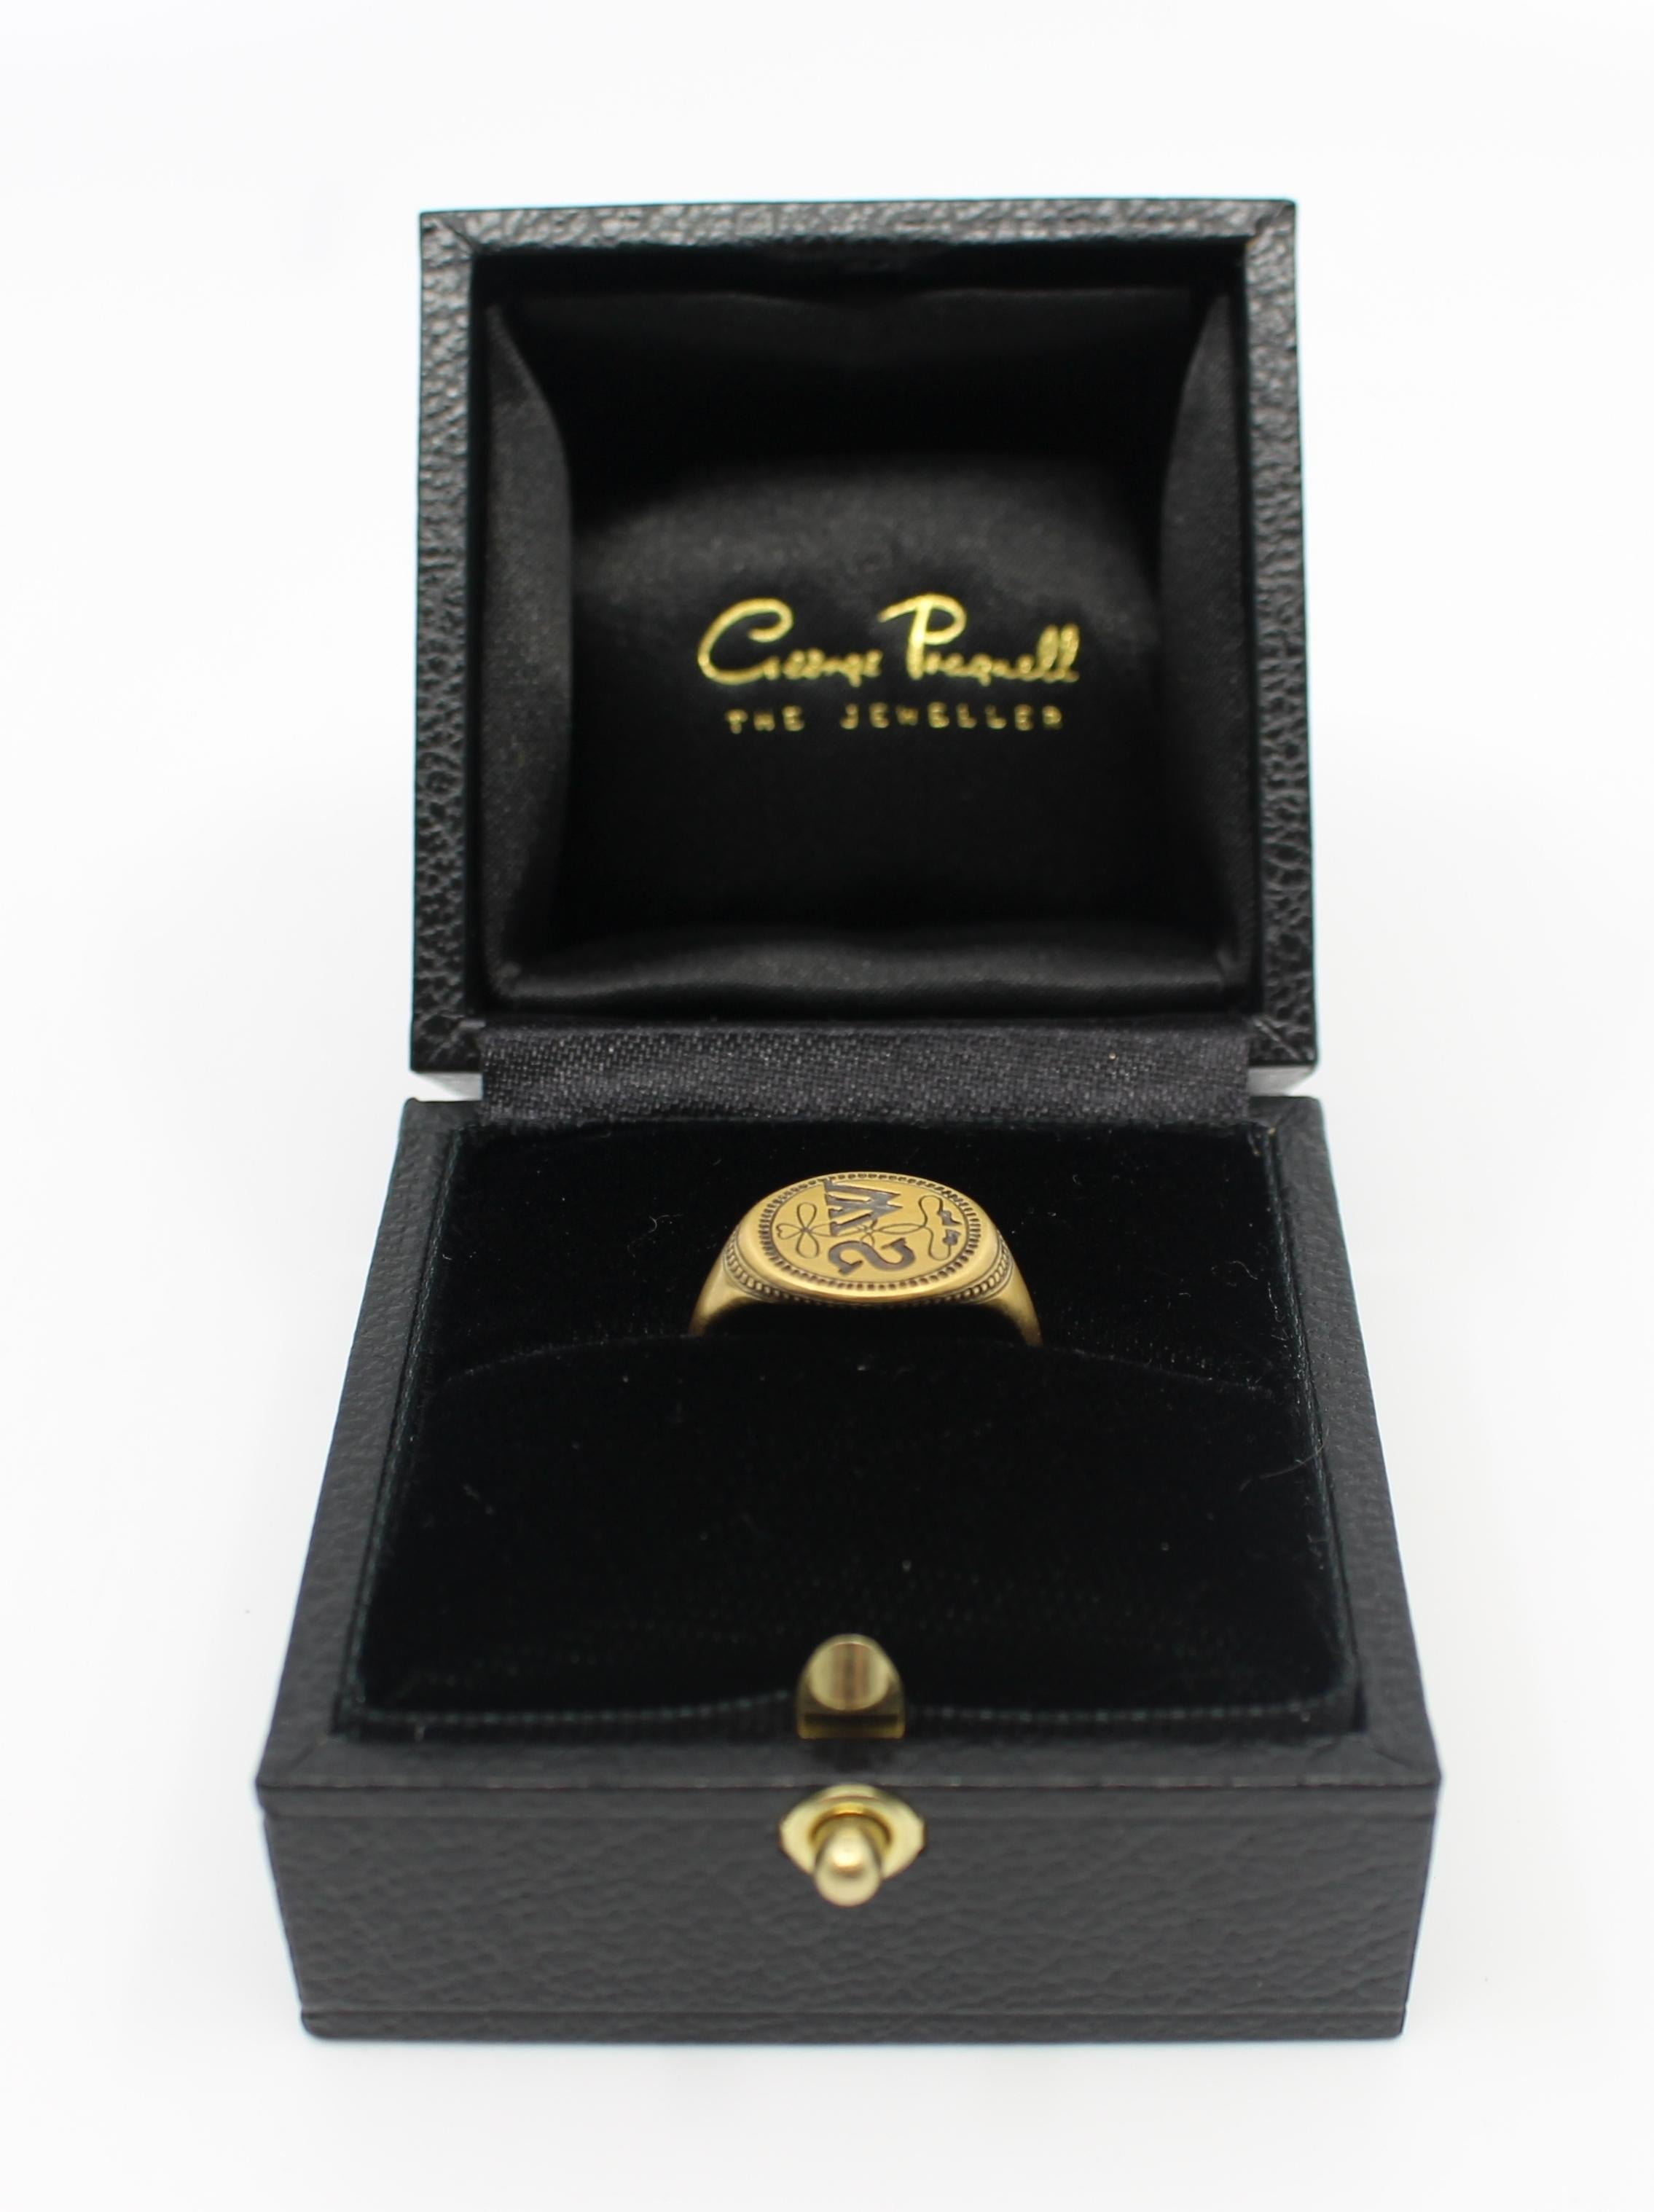 Designer 
George Pragnell

Gold 
Fully hallmarked, stamped 750. Sold as and testing as 20ct

Weight 
8.6 g

Ring size:
L 1/2 (British), 6 (US)

Condition:
Excellent. Never worn. Original padded jewelers ring box. Complete with